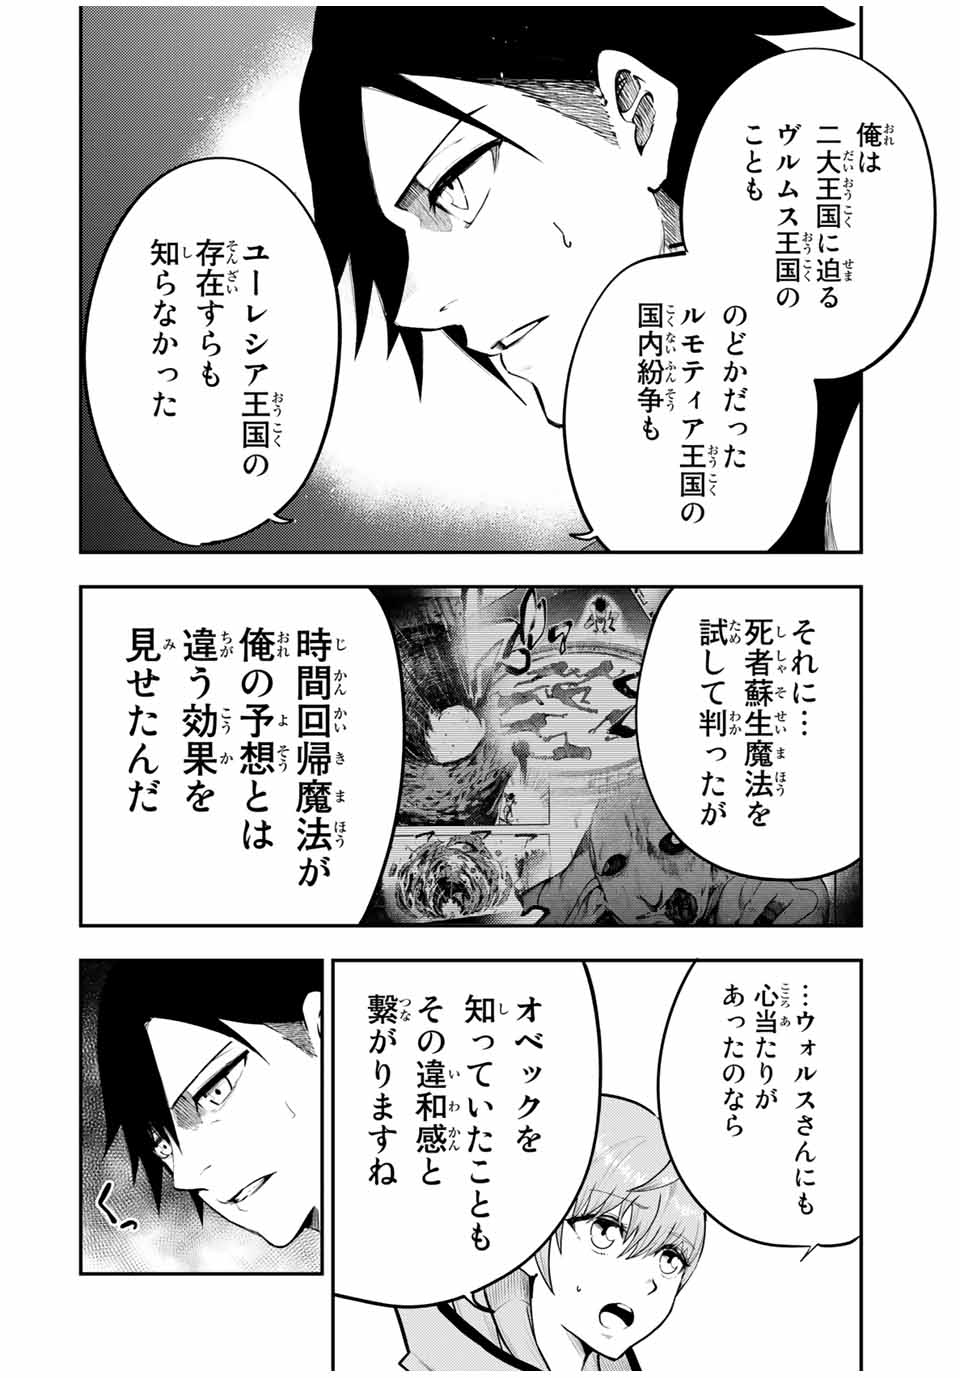 the strongest former prince-; 奴隷転生 ～その奴隷、最強の元王子につき～ 第50話 - Page 2